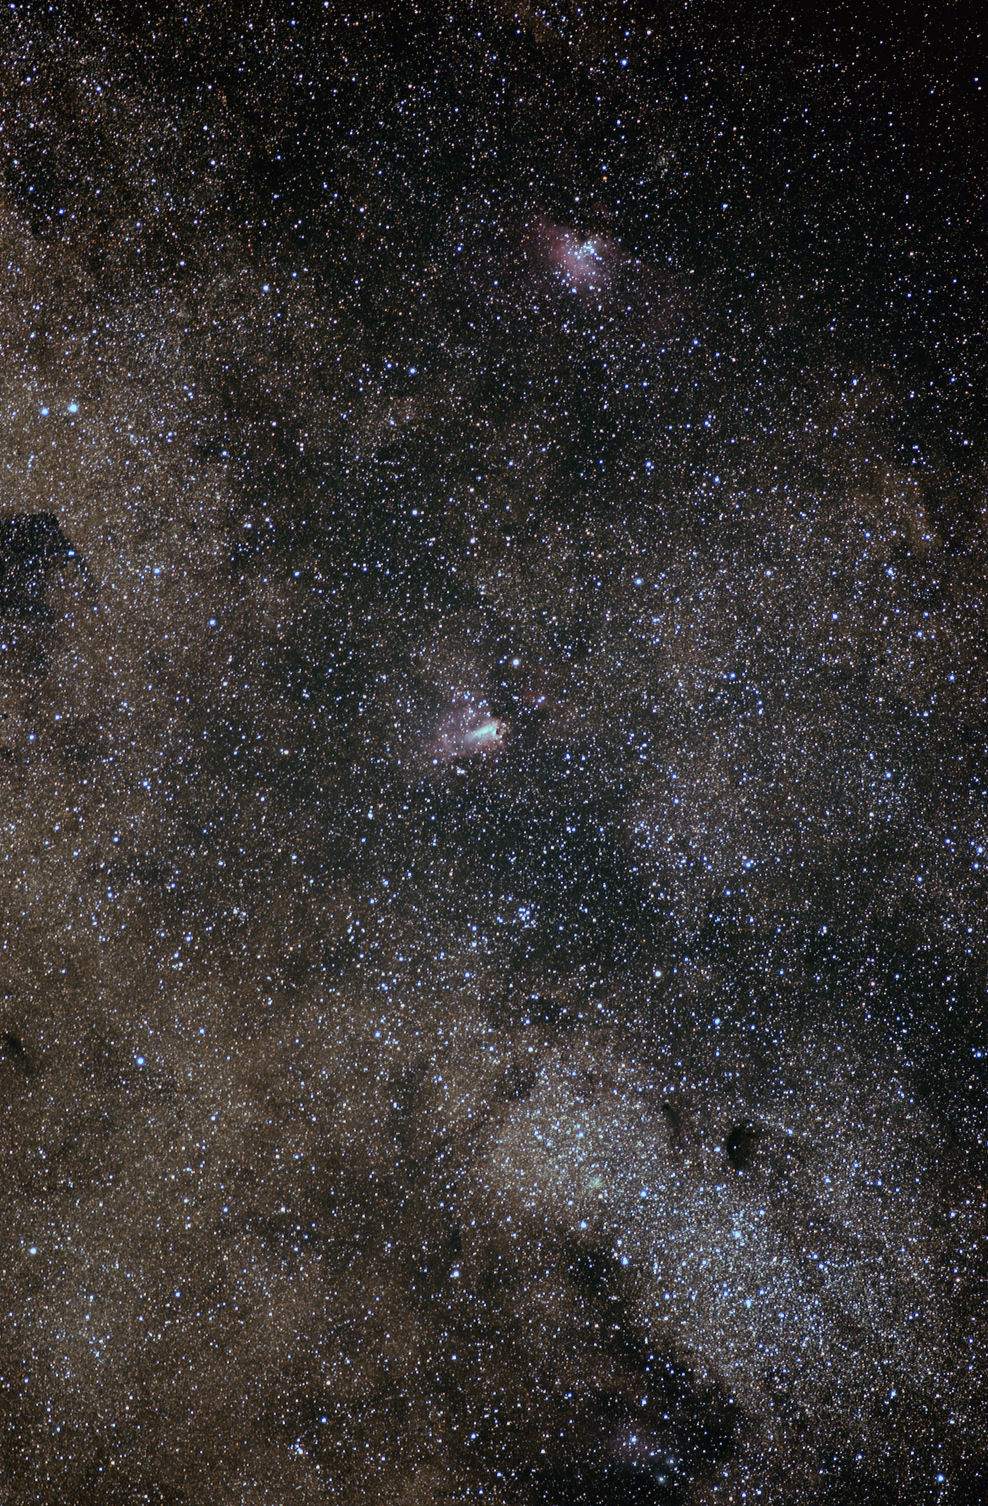 Messier M16, M17, M18 and M24